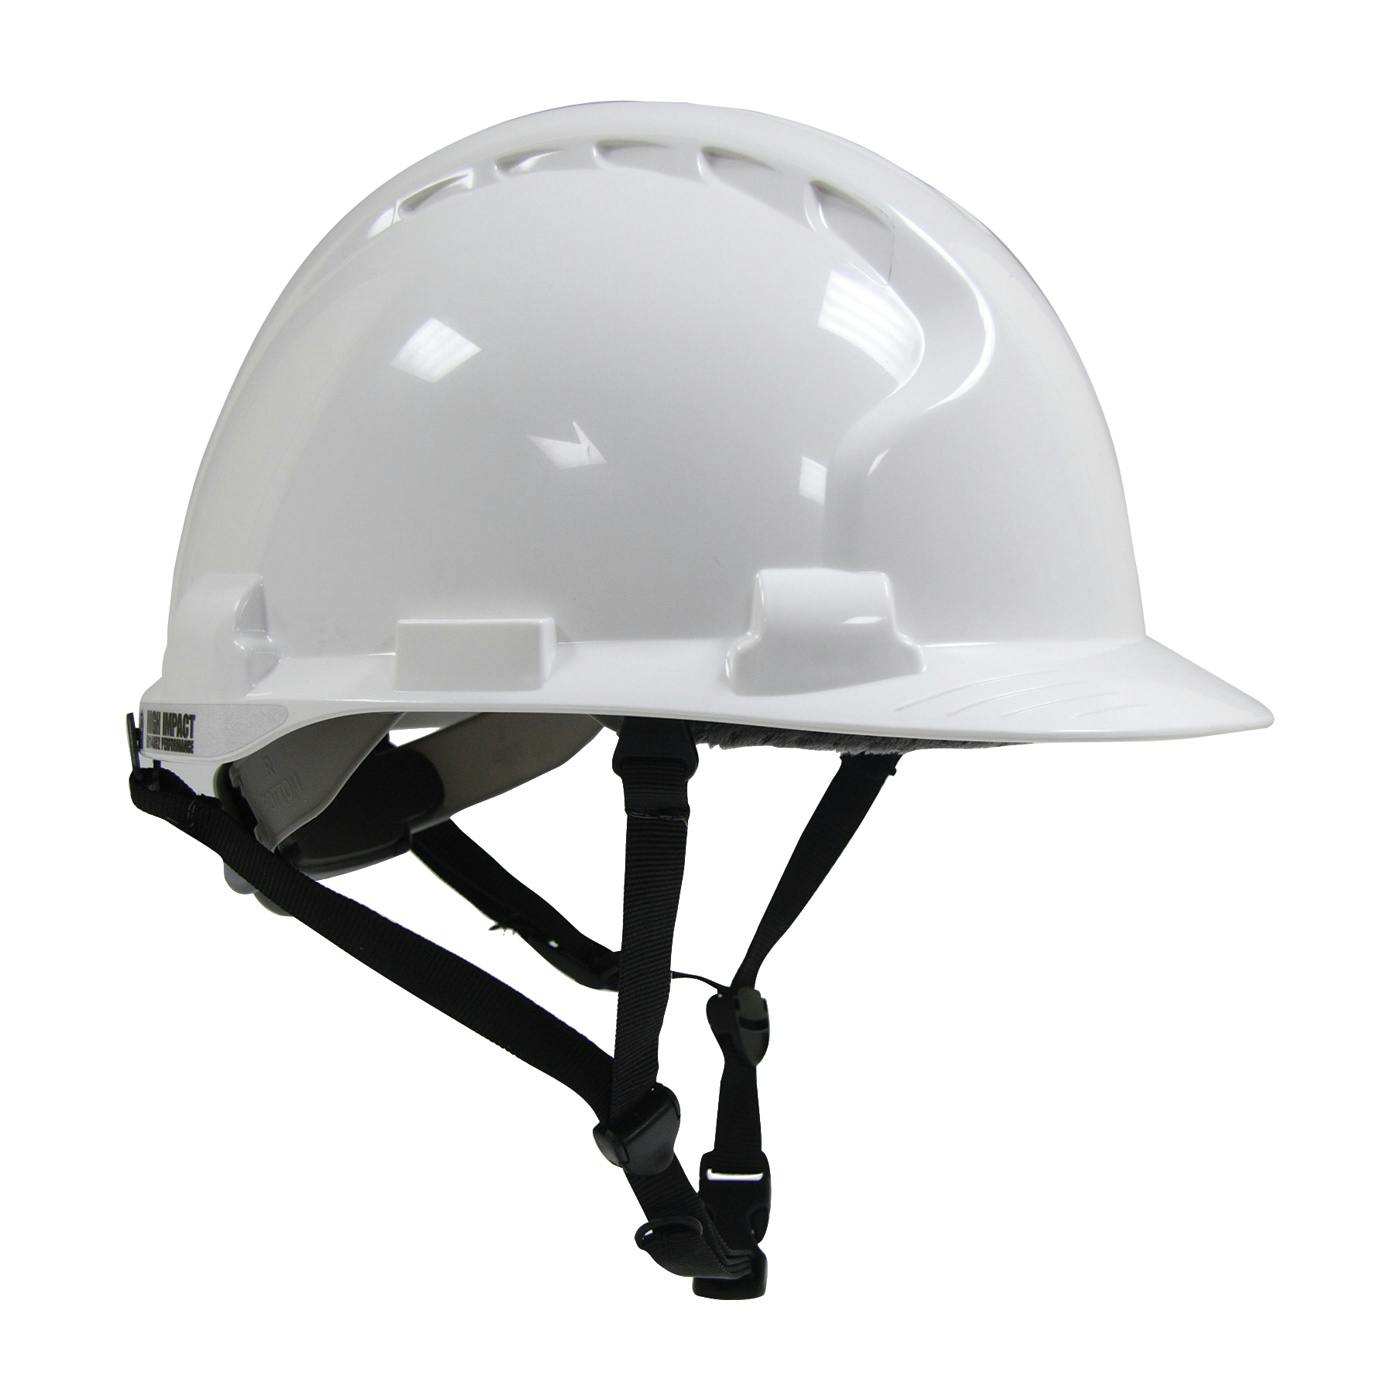 MK8 Evolution® Type II Linesman Hard Hat with HDPE Shell, EPS Impact Liner, Polyester Suspension, Wheel Ratchet Adjustment and 4-Point Chin Strap (280-AHS240)_0